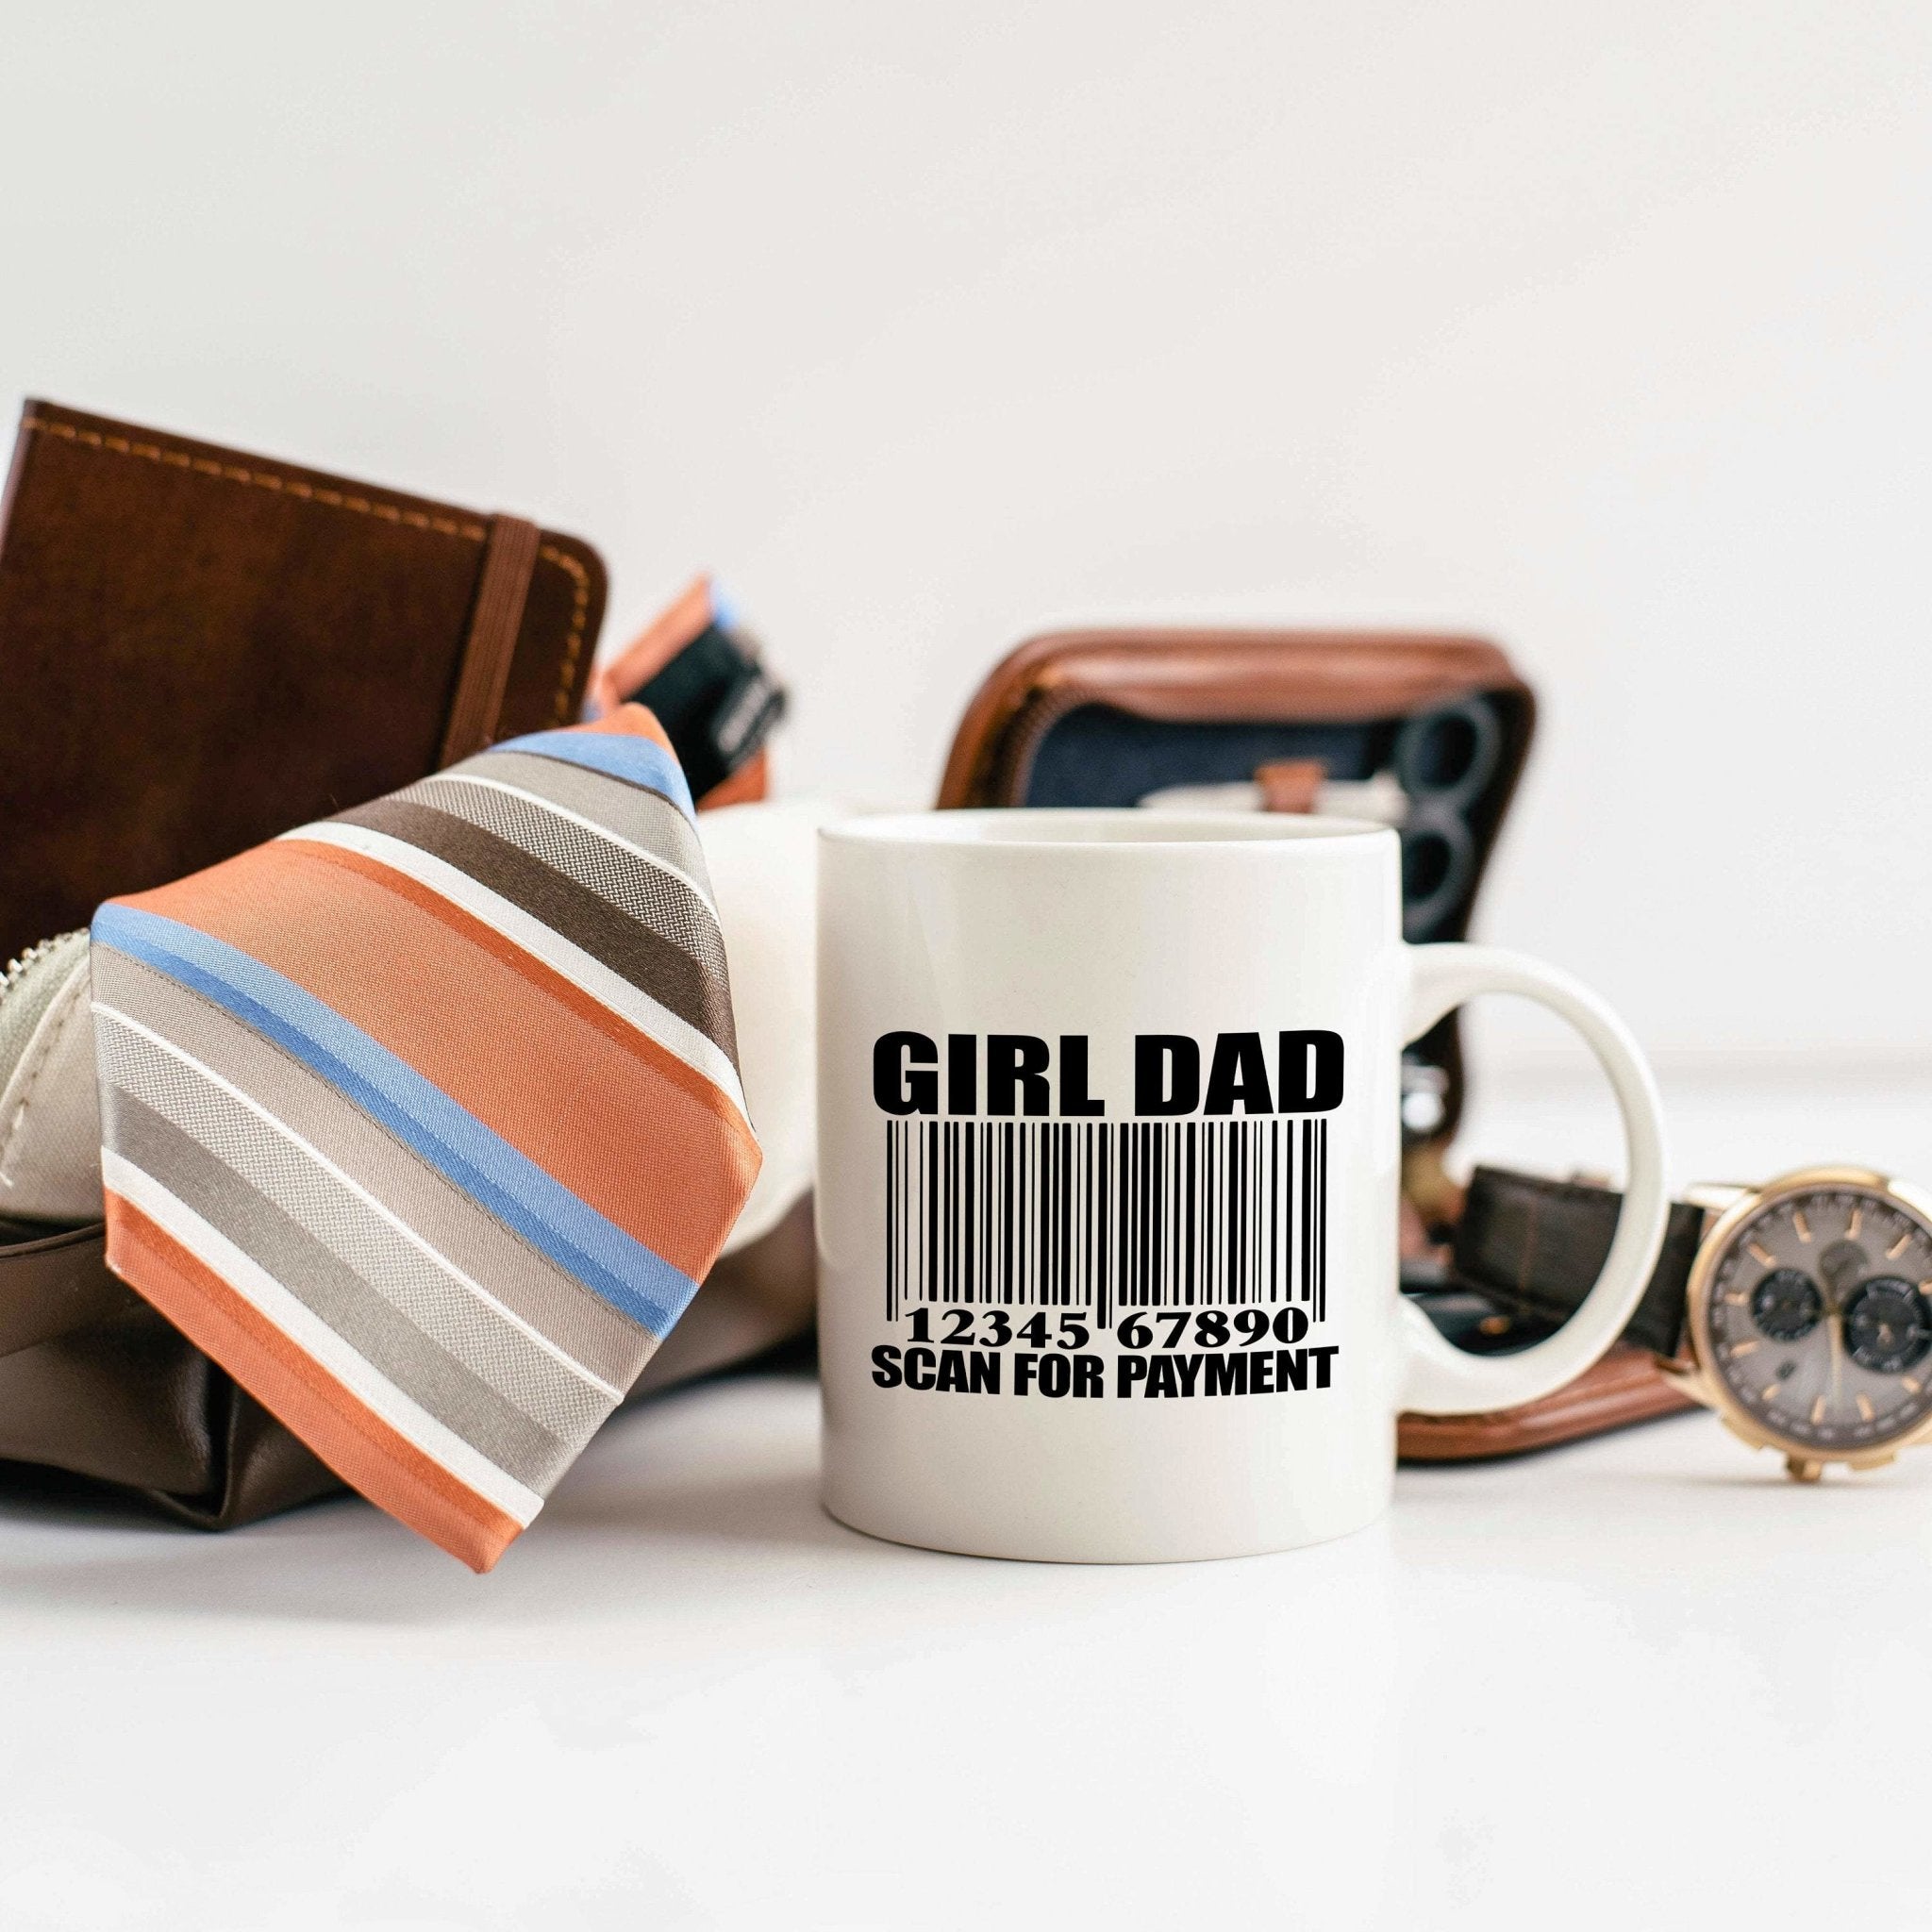 Personalized Gifts for Men, Coffee Mug for Dad, Monogram Coffee